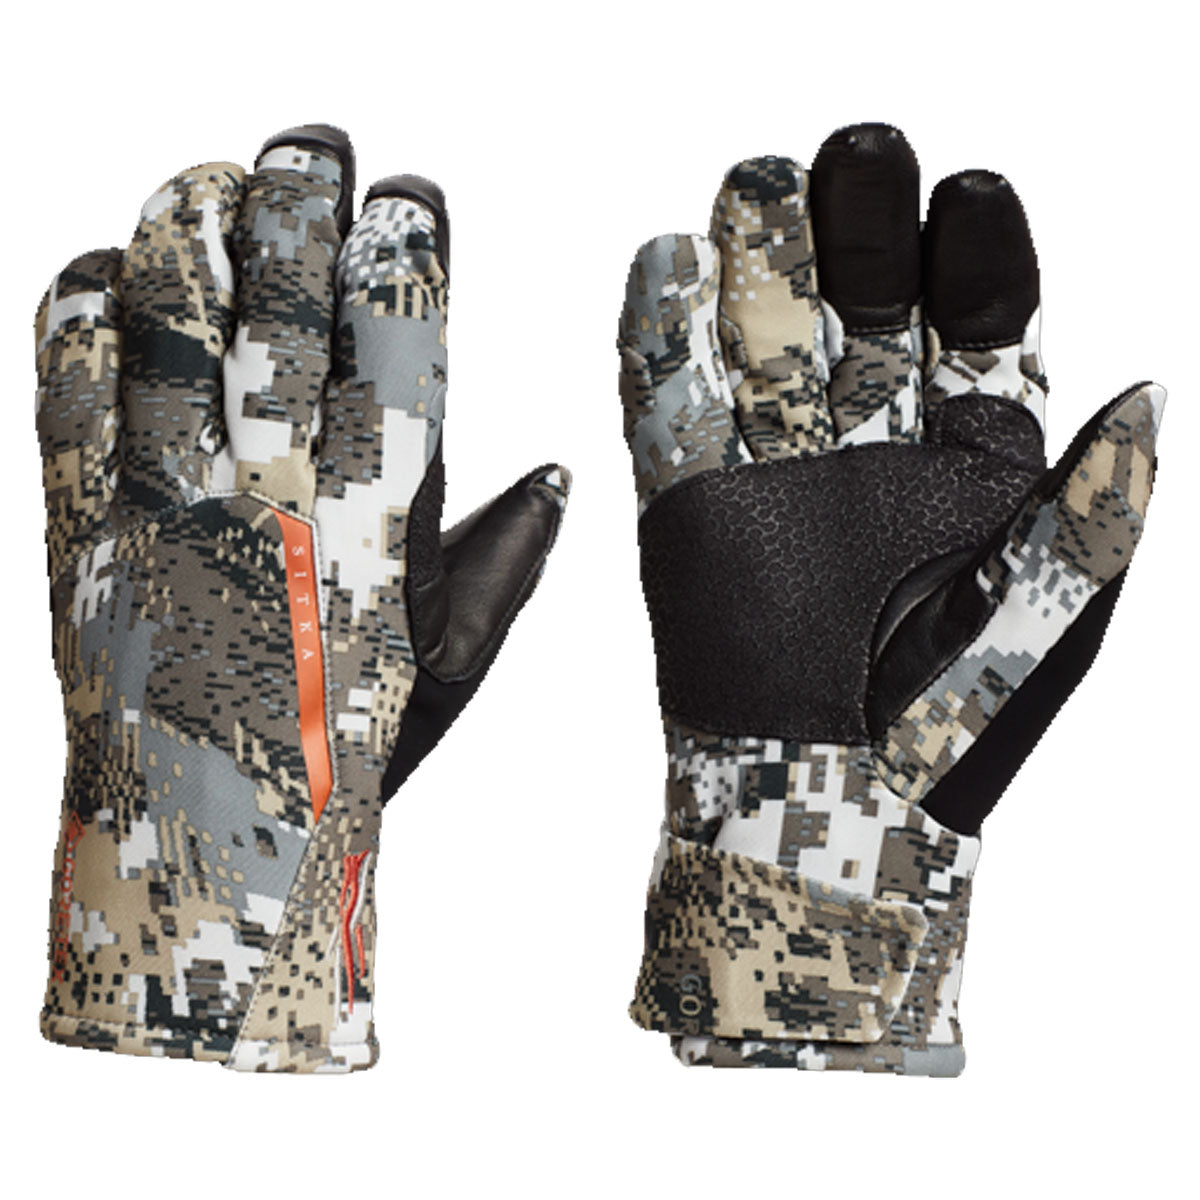 Sitka Downpour GTX Glove in  by GOHUNT | Sitka - GOHUNT Shop